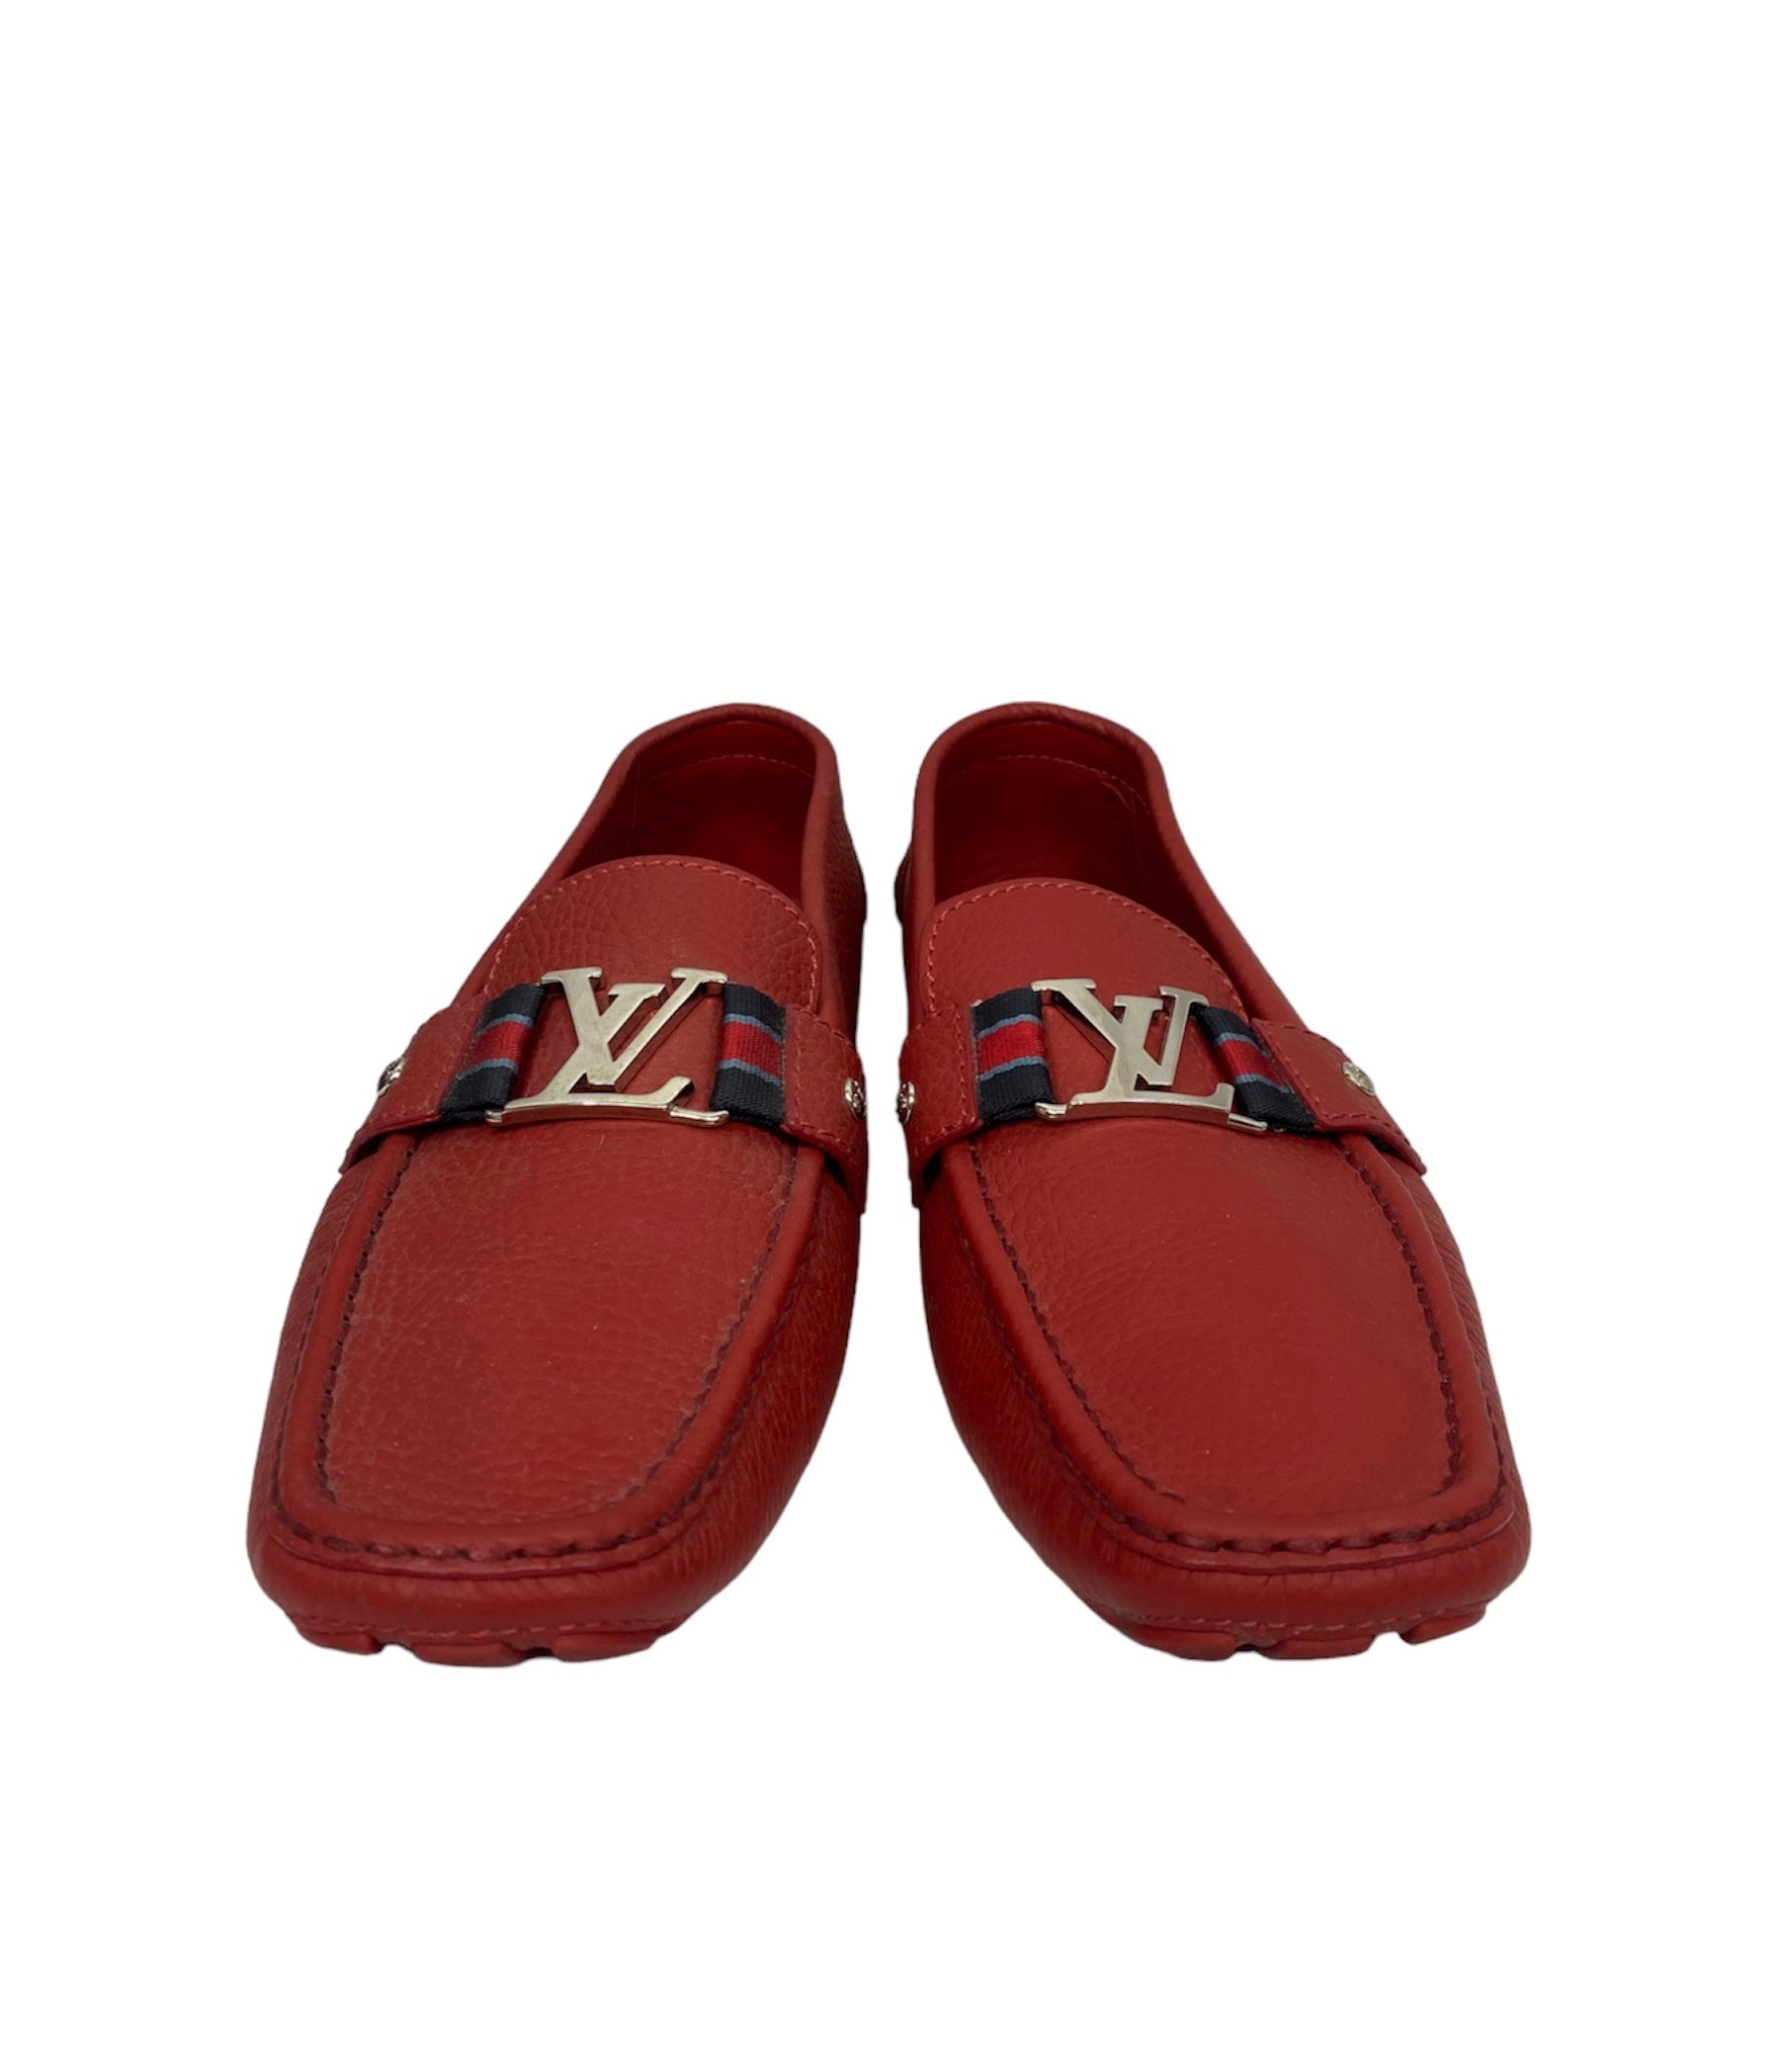 Men's Louis Vuitton Loafers from $600